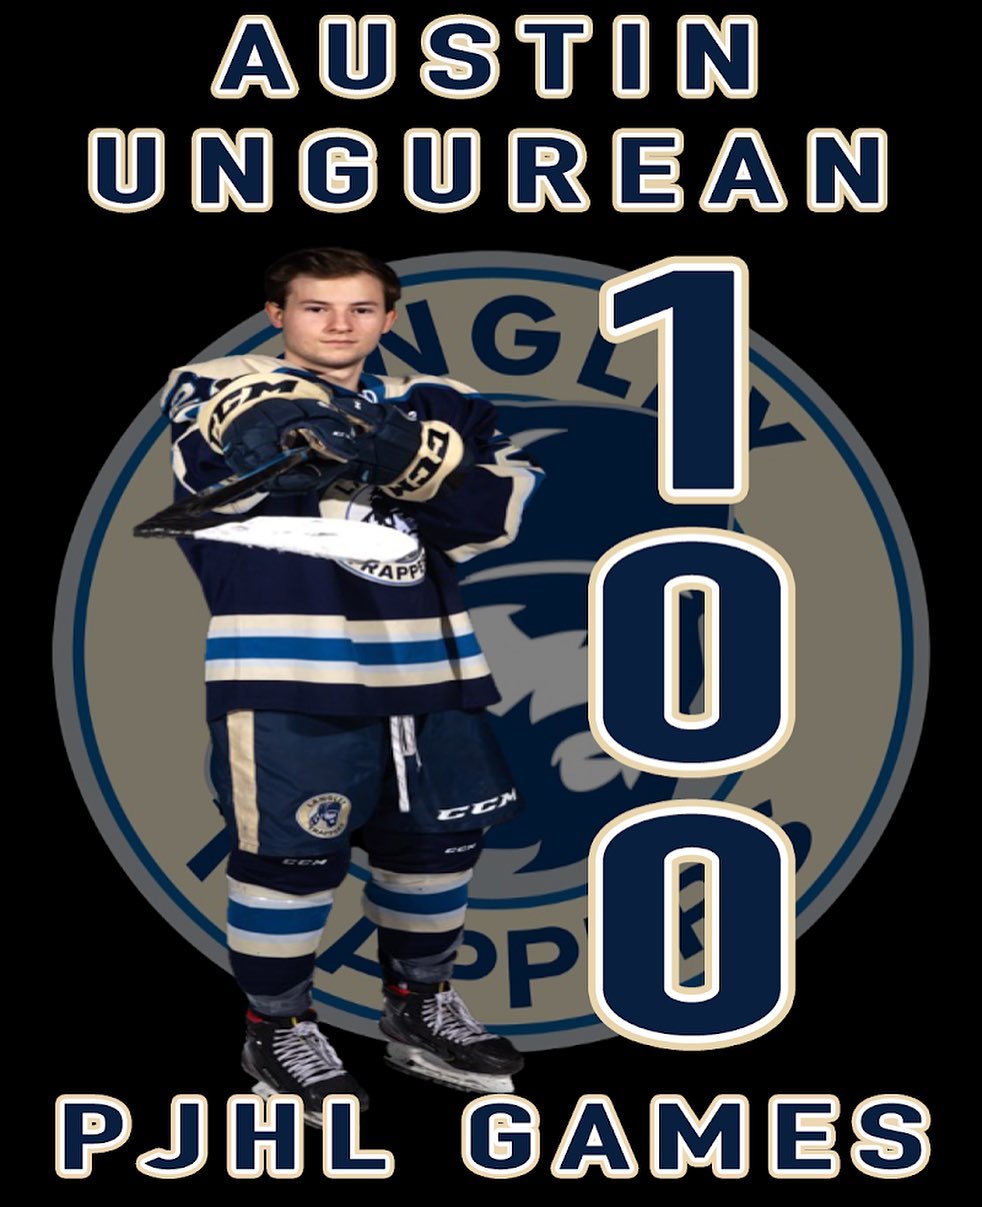 Congratulations to fourth year veteran and all around nice guy Austin Ungurean @ungurean7 who will be playing in his 100th Pacific Junior Hockey League game this evening as ‘Ungy’ and the Trappers face-off against the Delta Ice Hawks. Ungurean has accumulated 9 Goals and 16 Assists for 25 Points in his Junior career. He took home the award for Guzzo’s best teammate last season and is continuing in the tradition of leadership this year.

Congratulations Austin! 

Go Trappers Go!